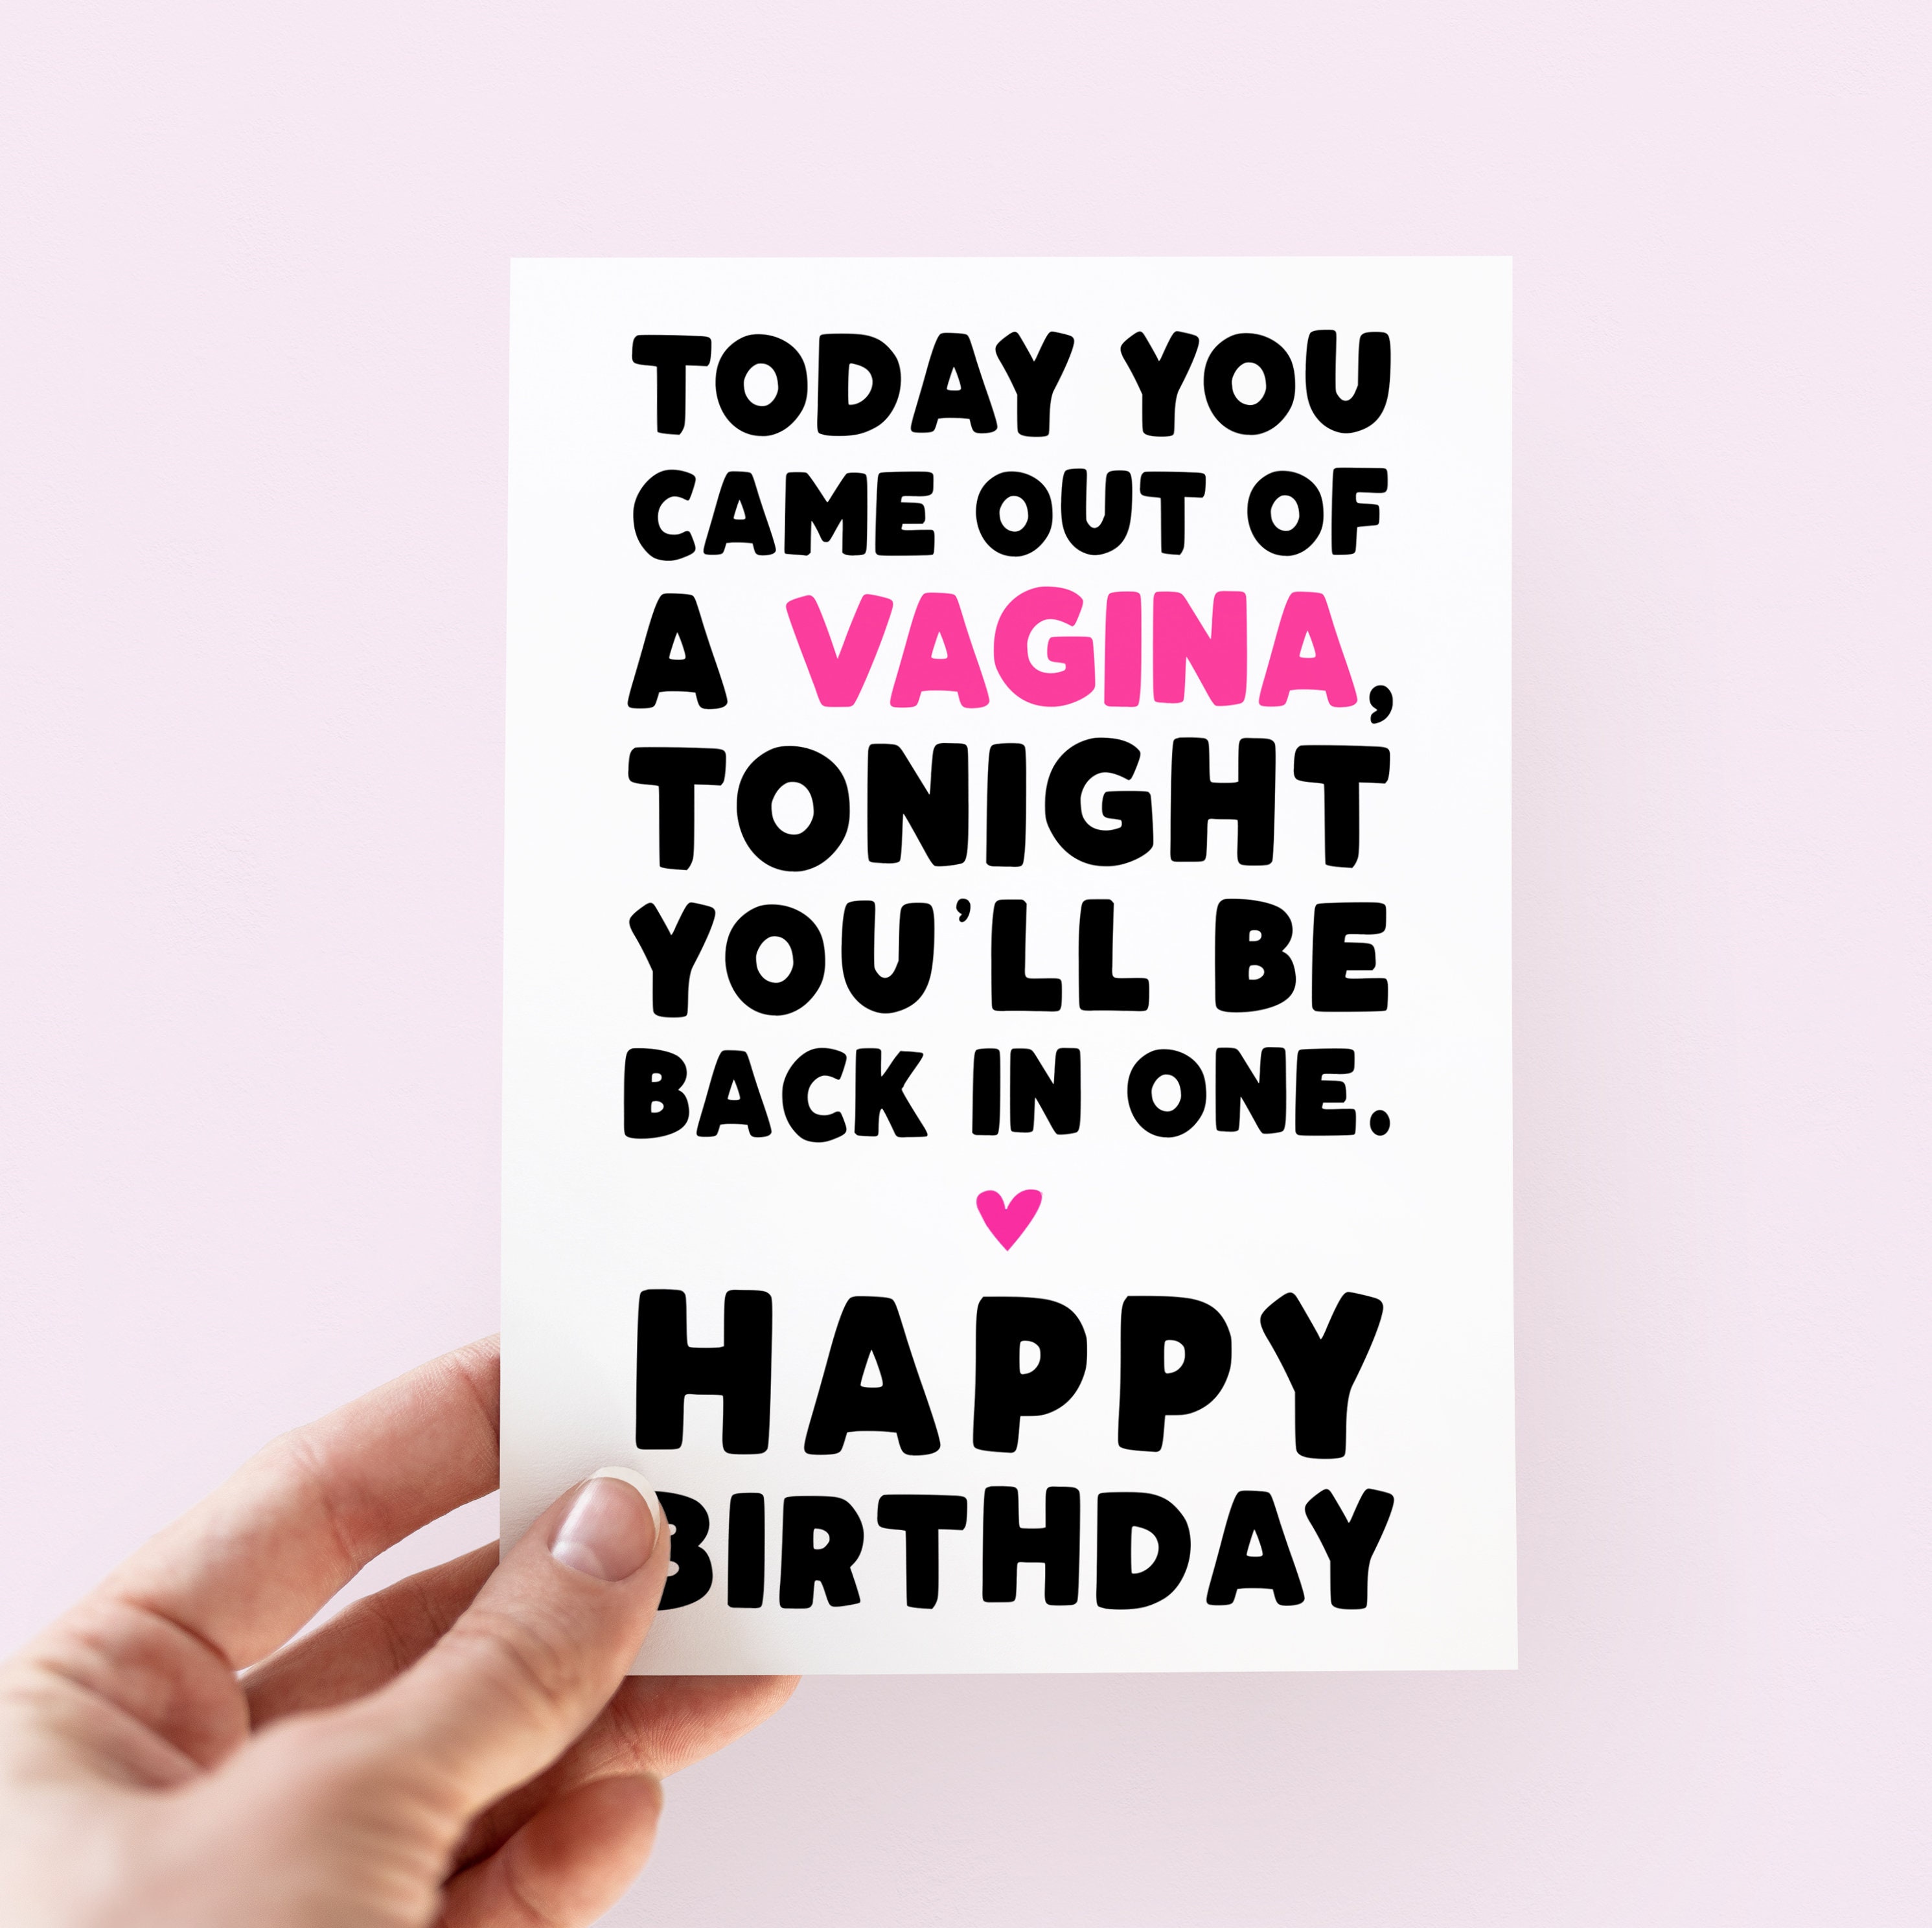 Today You Came Out of A Vagina Birthday Card Funny image